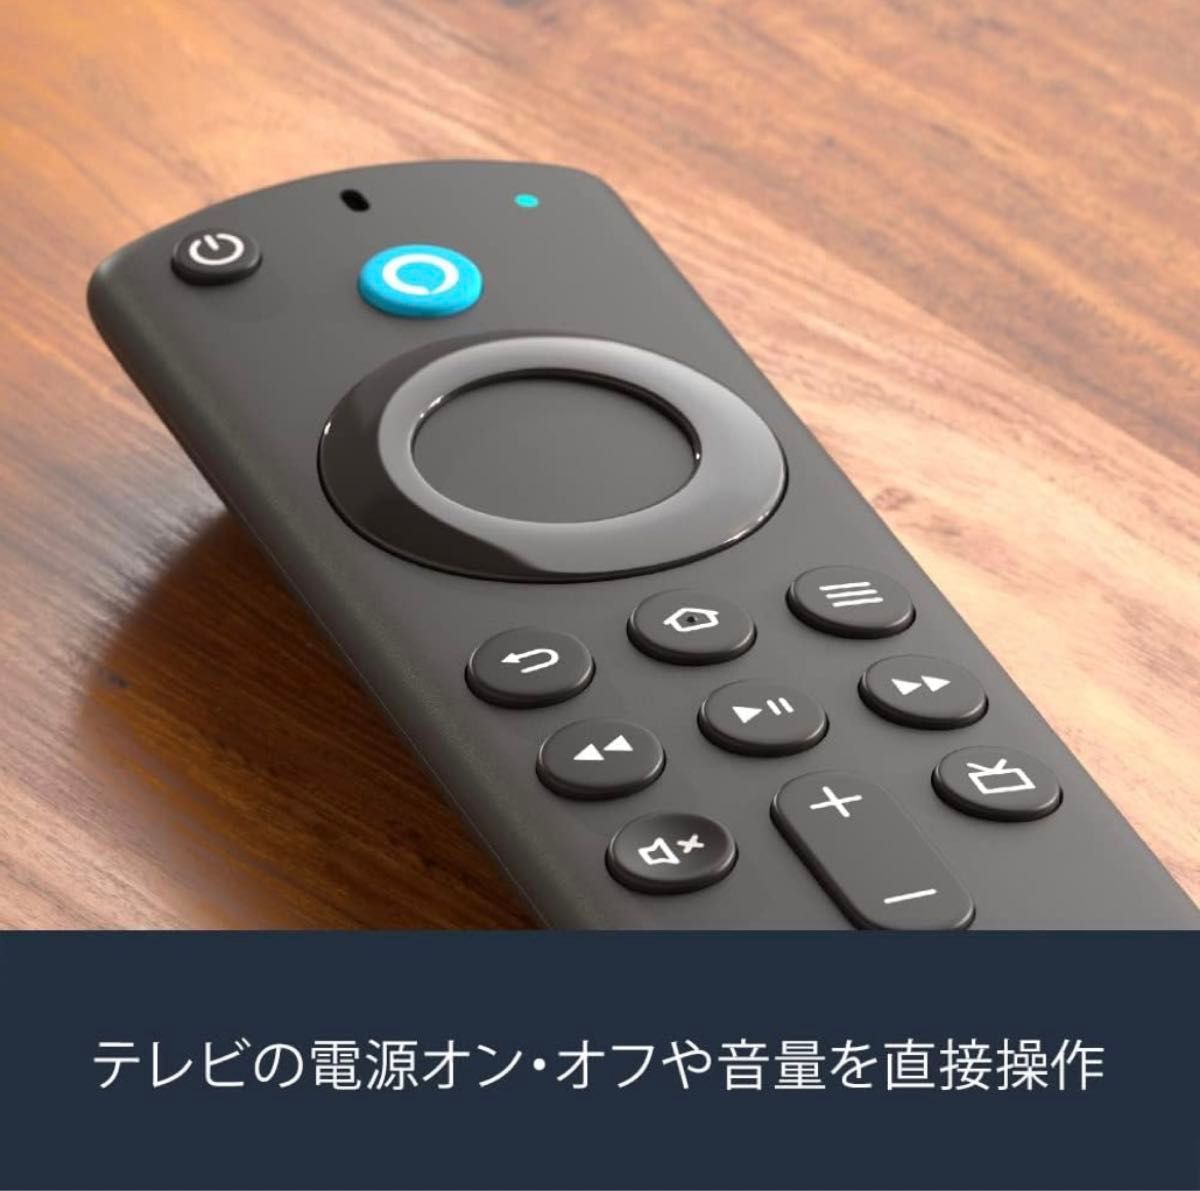 Fire TV Stick リモコンのみ